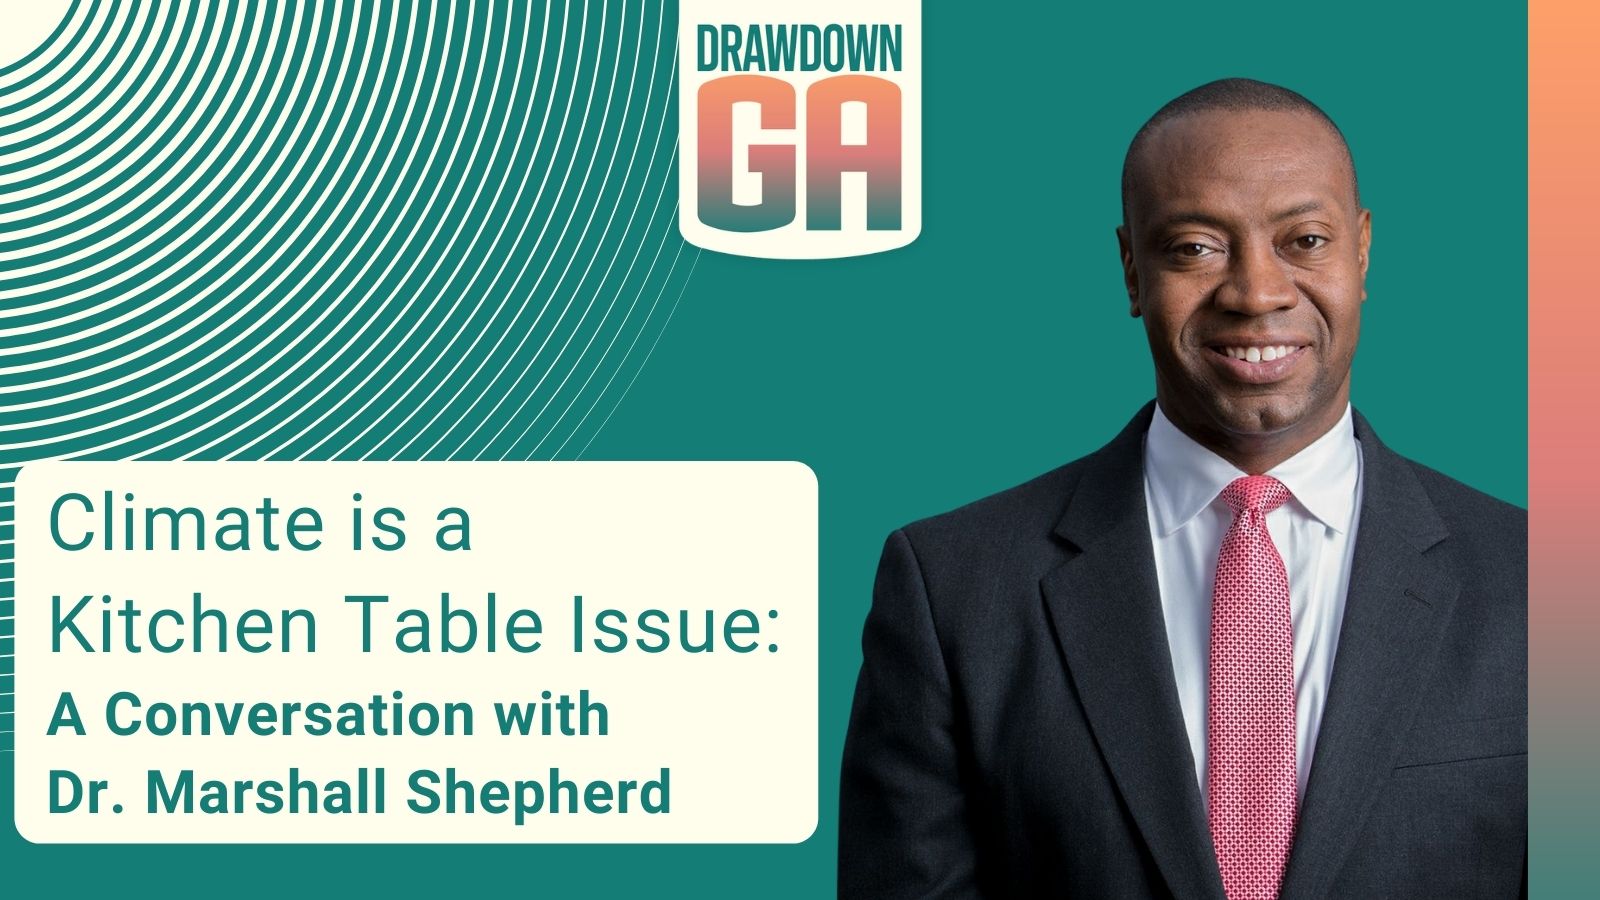 Climate is a Kitchen Table Issue: A Conversation with Dr. Marshall Shepherd